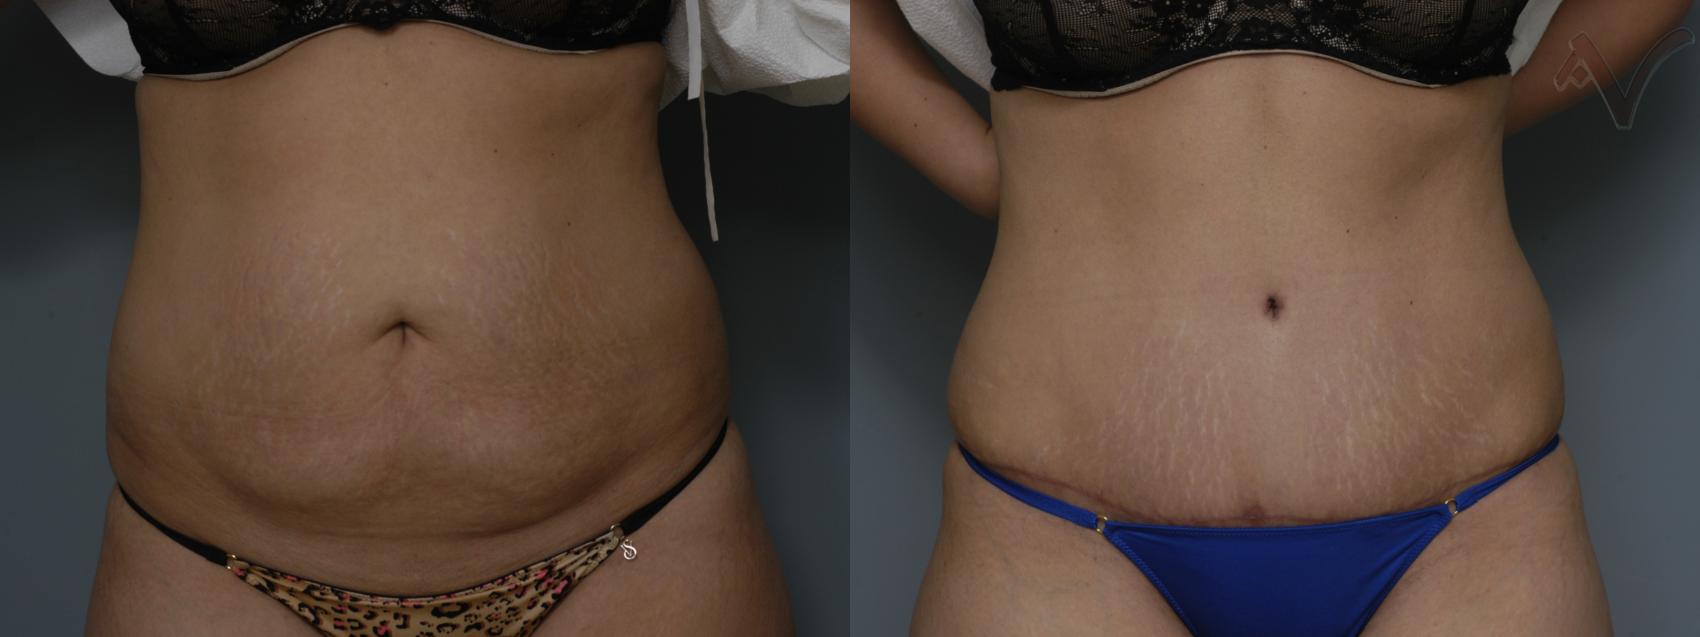 Patient C - 3 months Post-Operative Tummy Tuck Frontal View — Dr